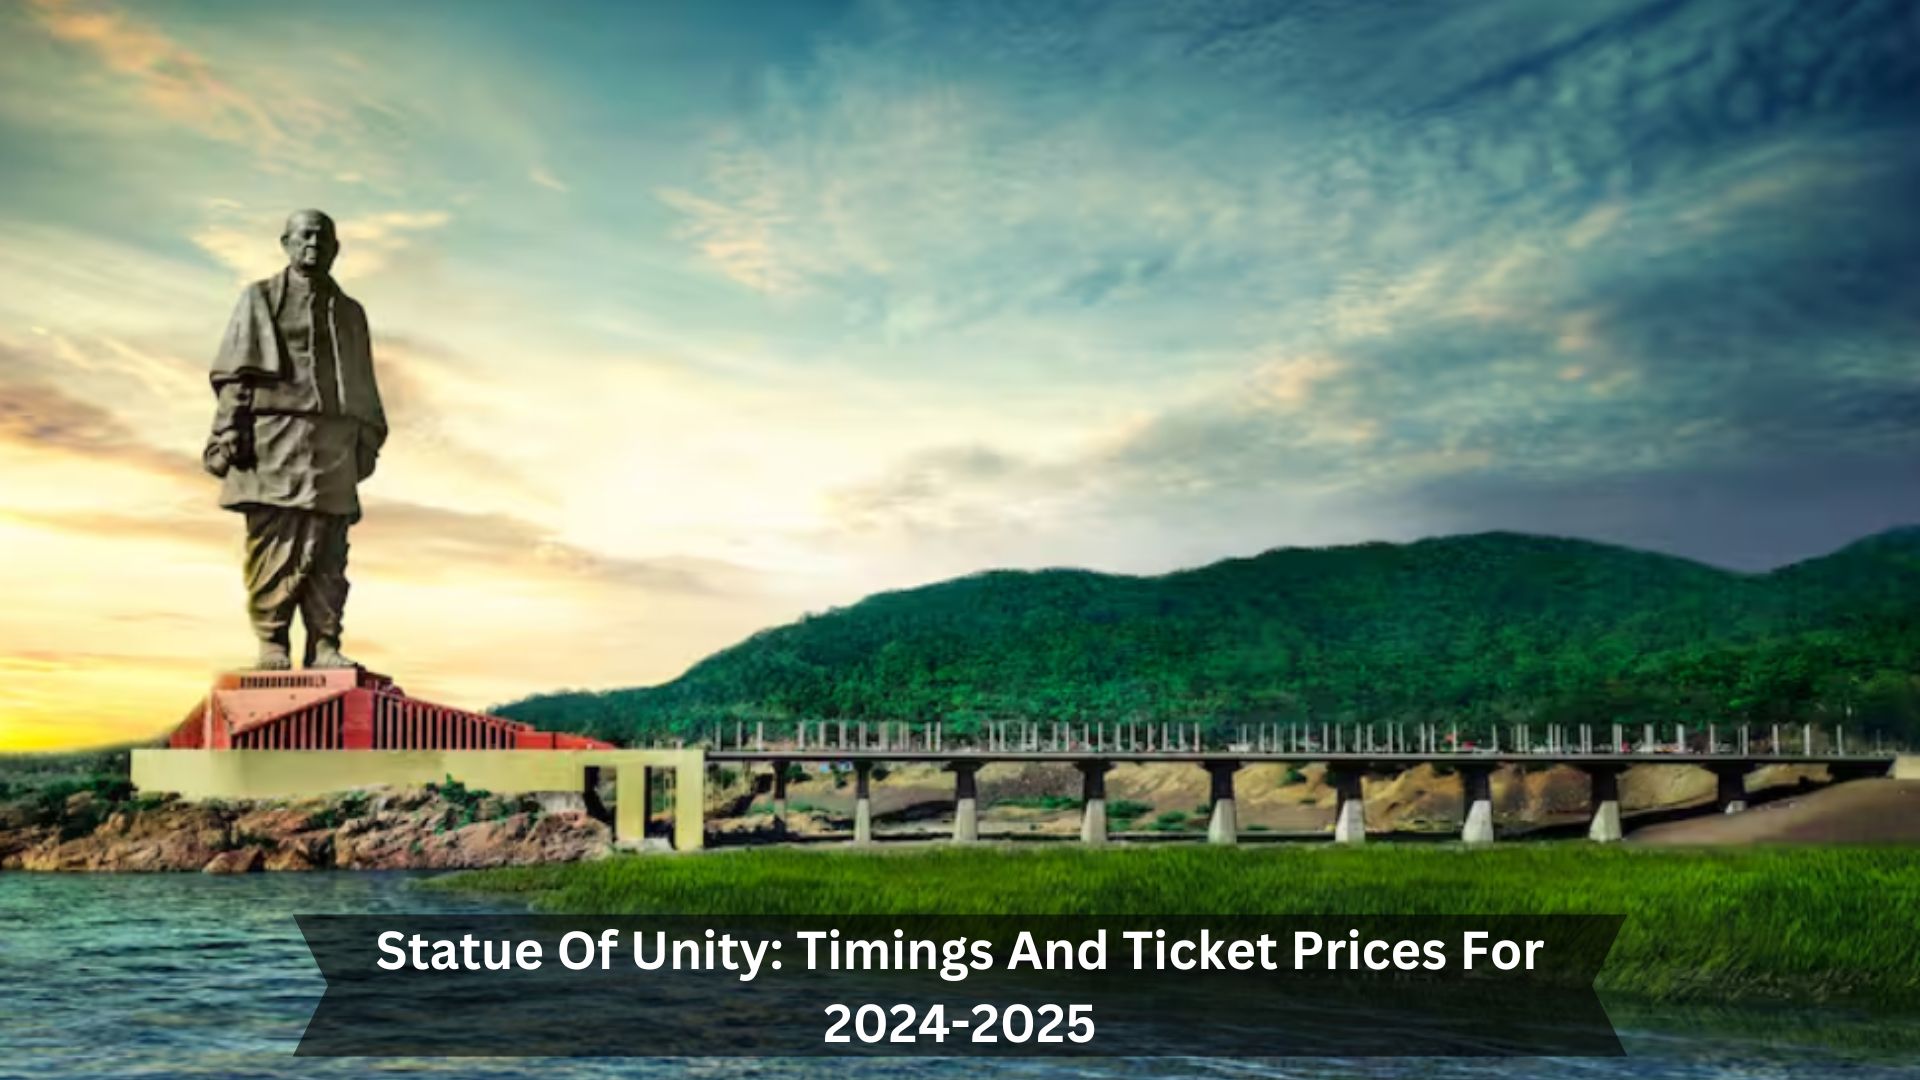 Statue-Of-Unity-Timings-And-Ticket-Prices-For-2024-2025